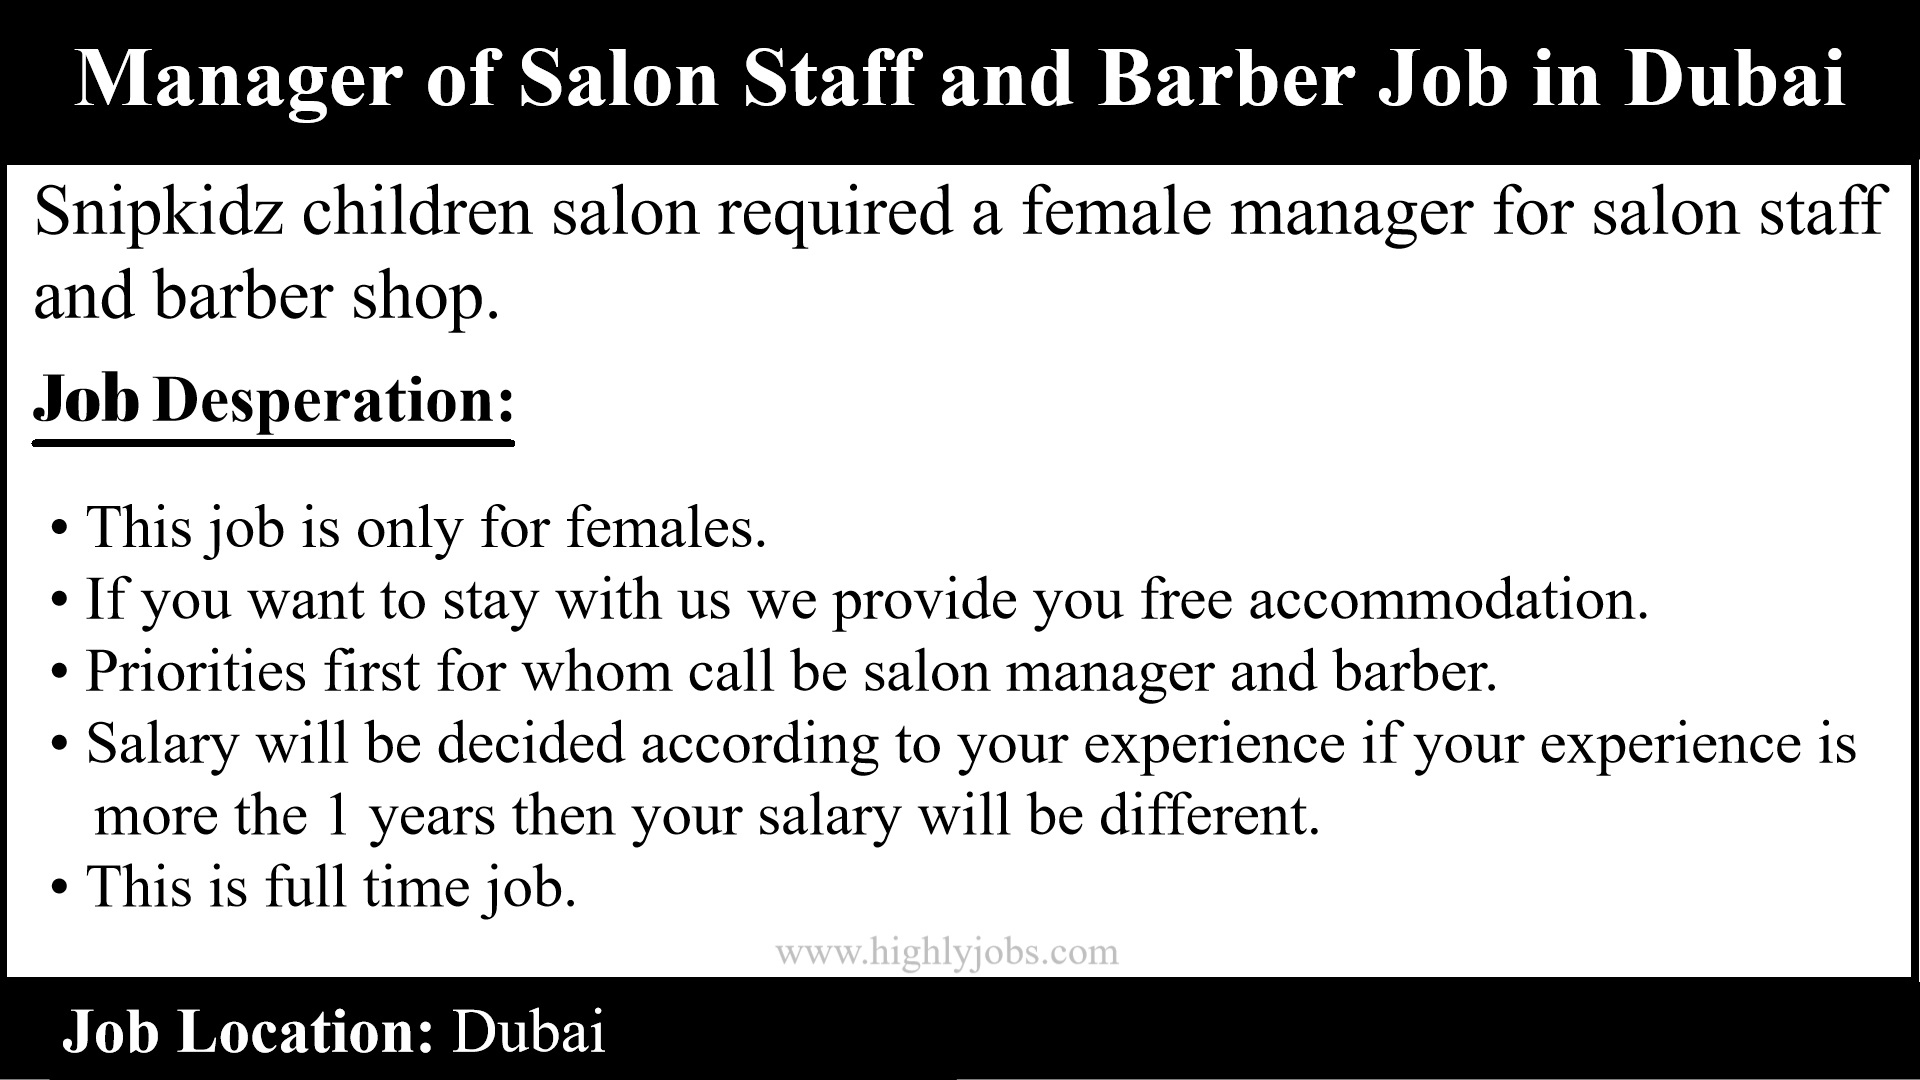 Manager of Salon Staff and Barber Job in Dubai